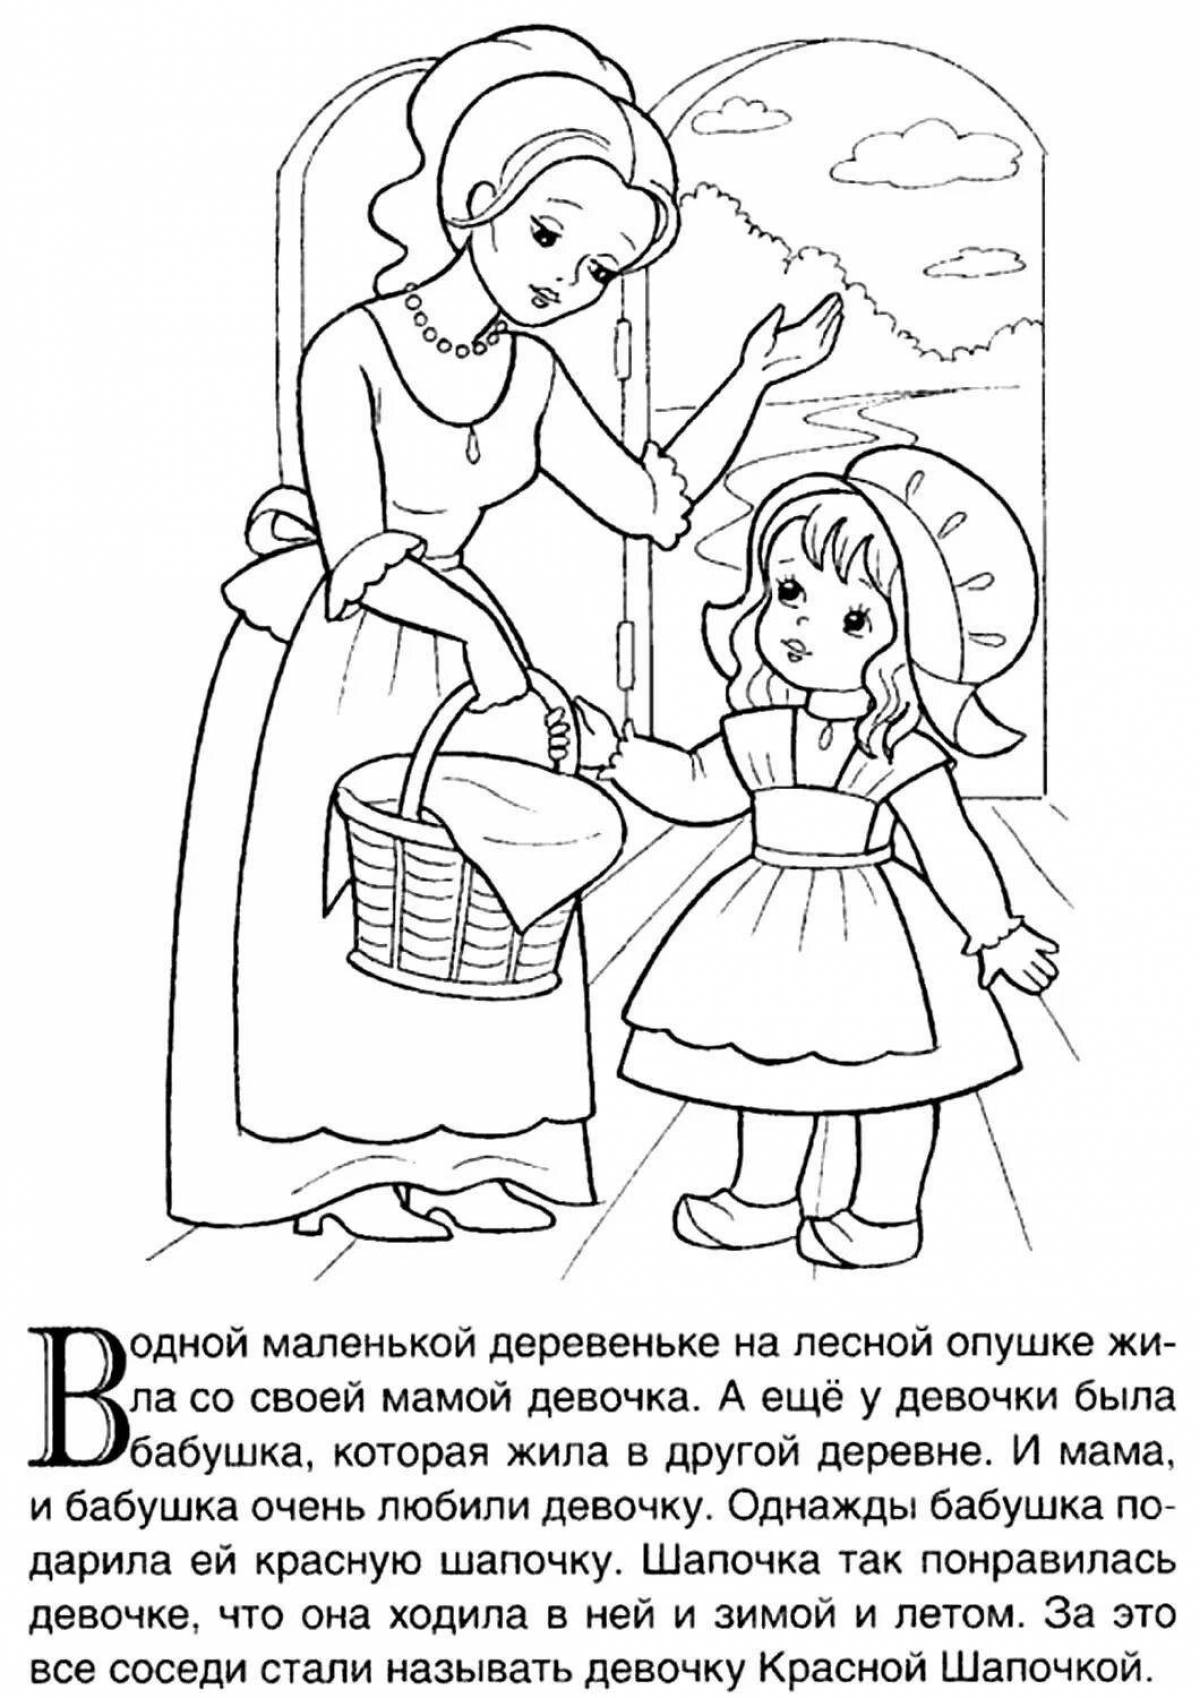 Mystical fairy tale coloring book for girls